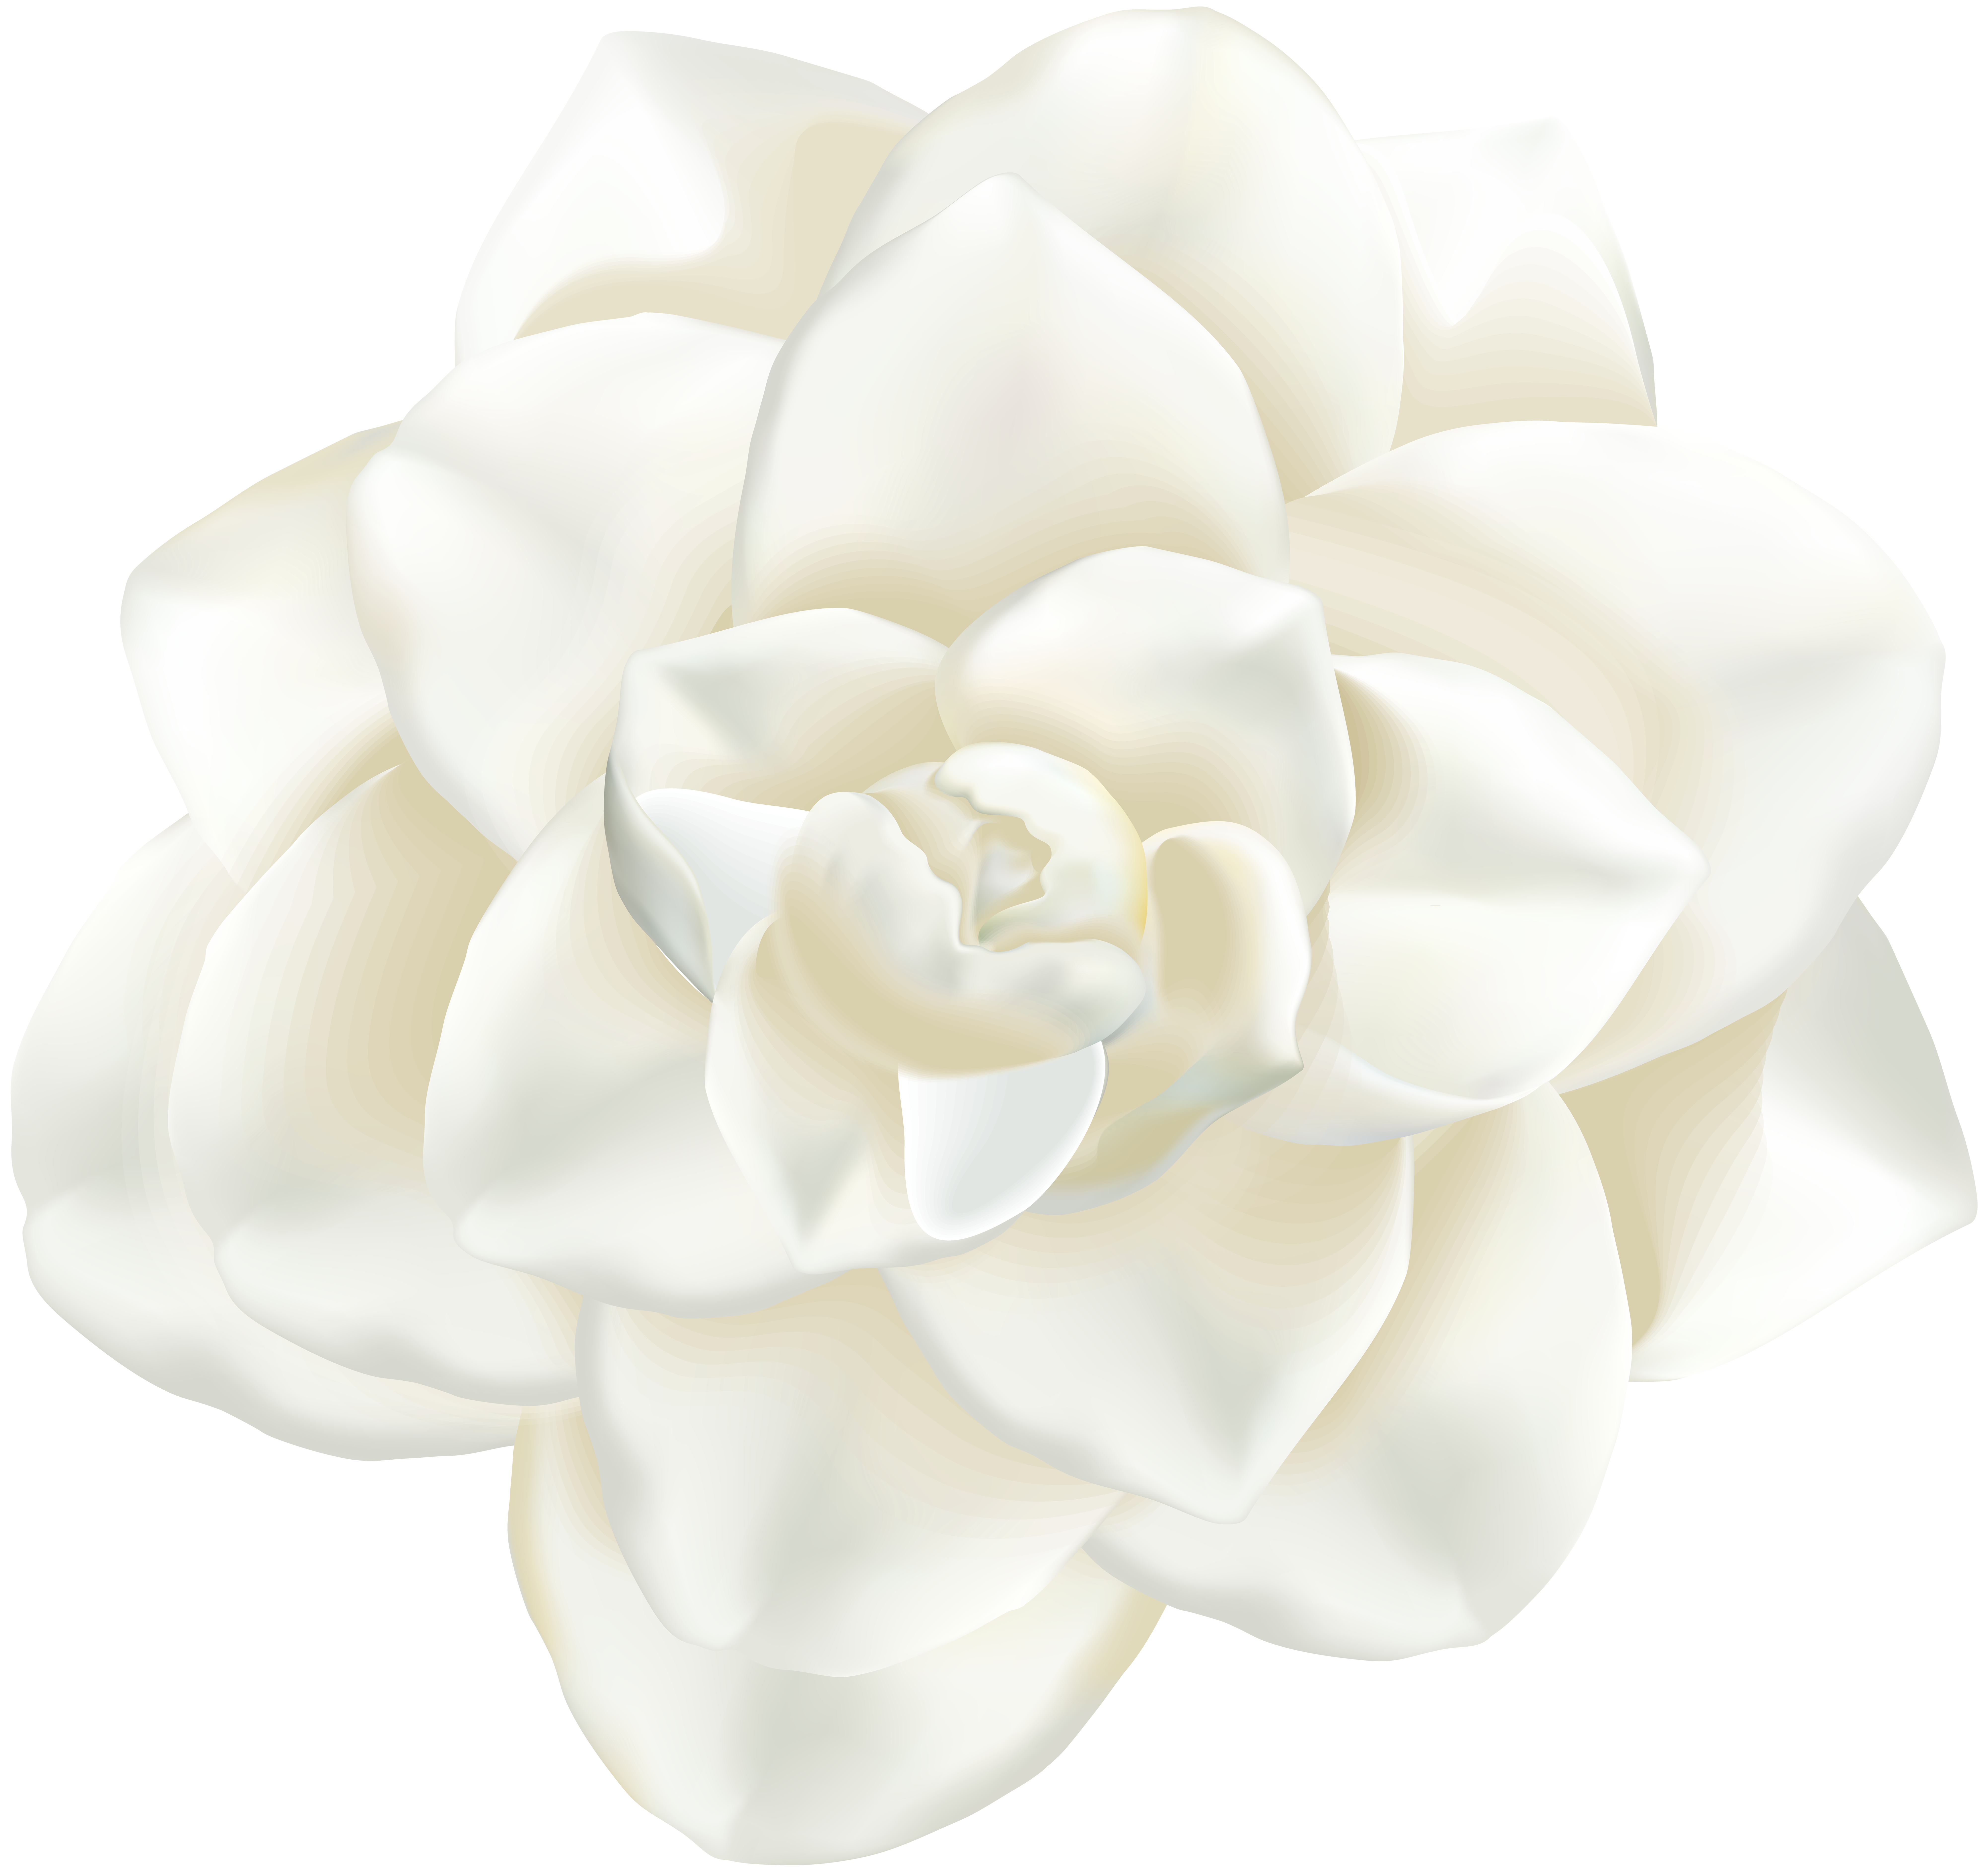 White Flower Png Clip Art Image Gallery Yopriceville High Quality Images And Transparent Png Free Clipart